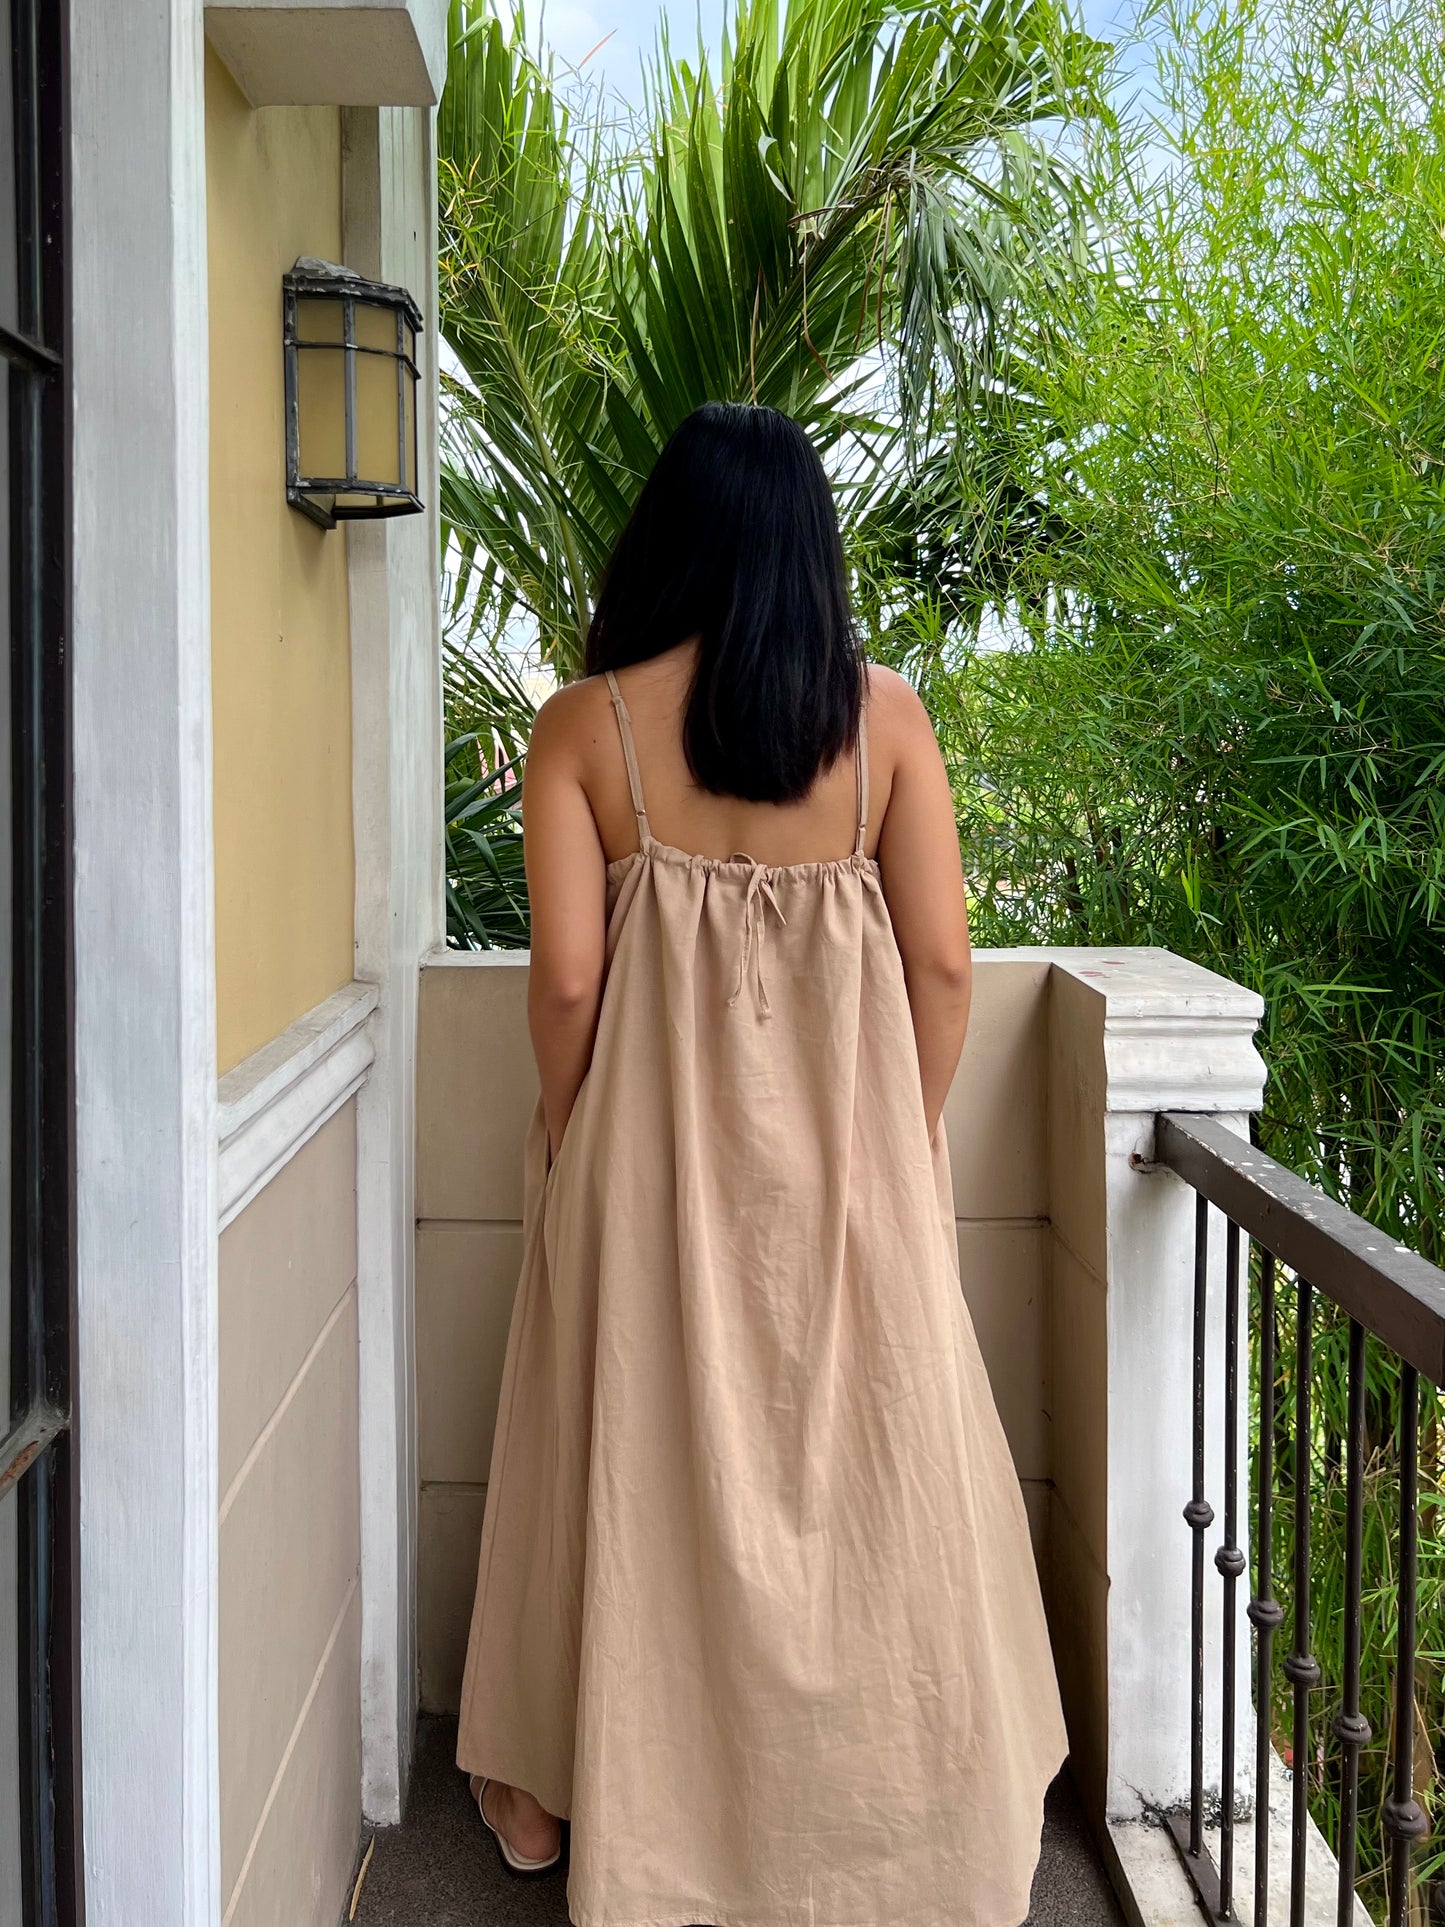 Limoncello Dress in Beige